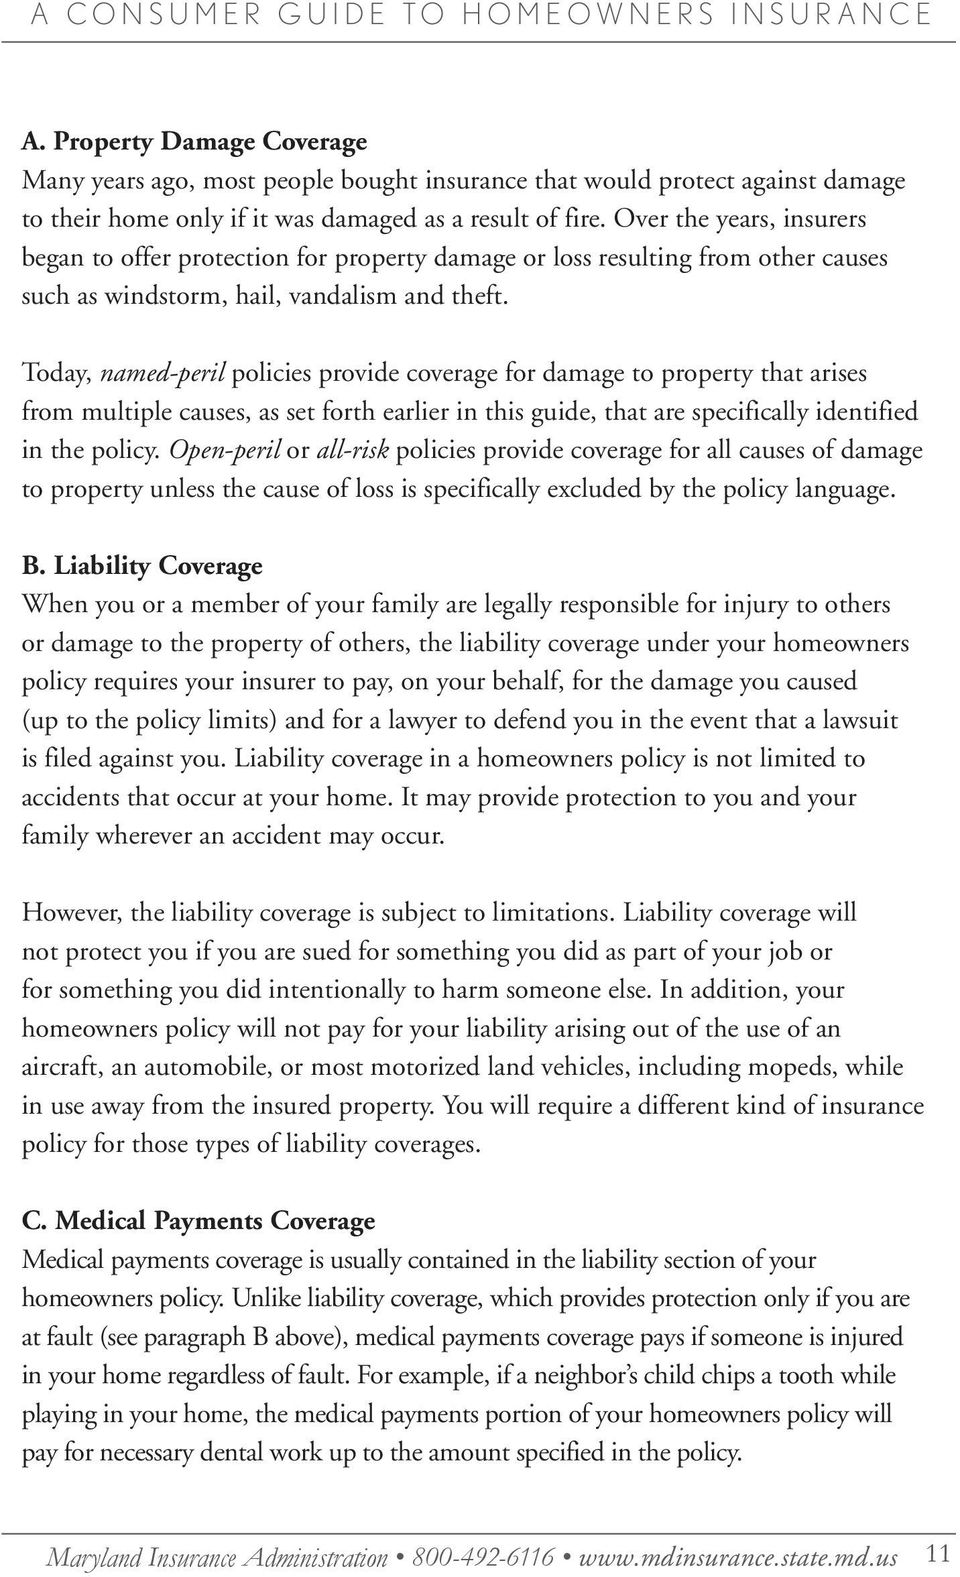 Today, named-peril policies provide coverage for damage to property that arises from multiple causes, as set forth earlier in this guide, that are specifically identified in the policy.